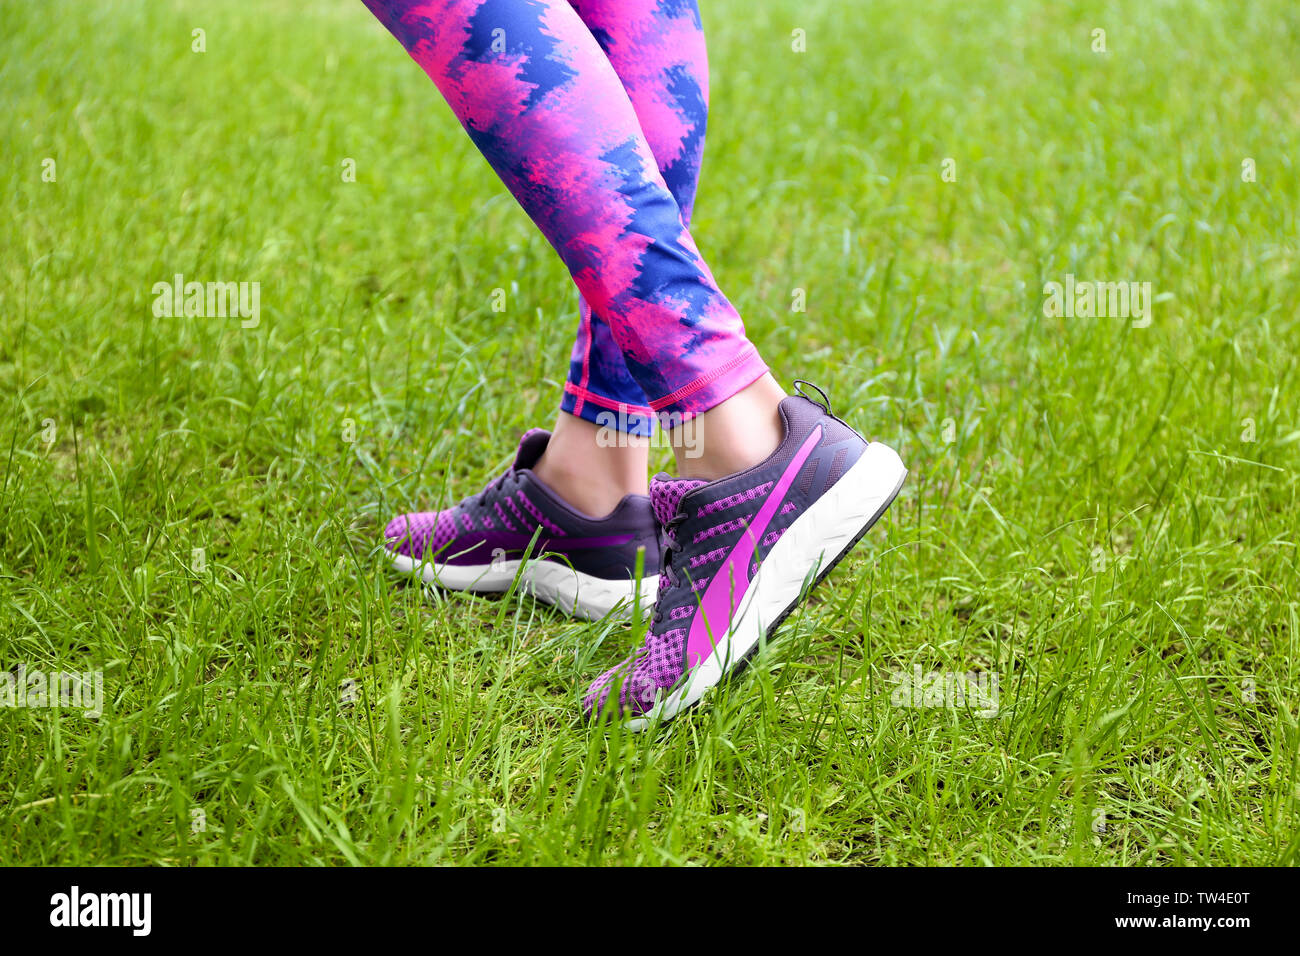 Female legs in leggings and purple sneakers on green grass Stock Photo